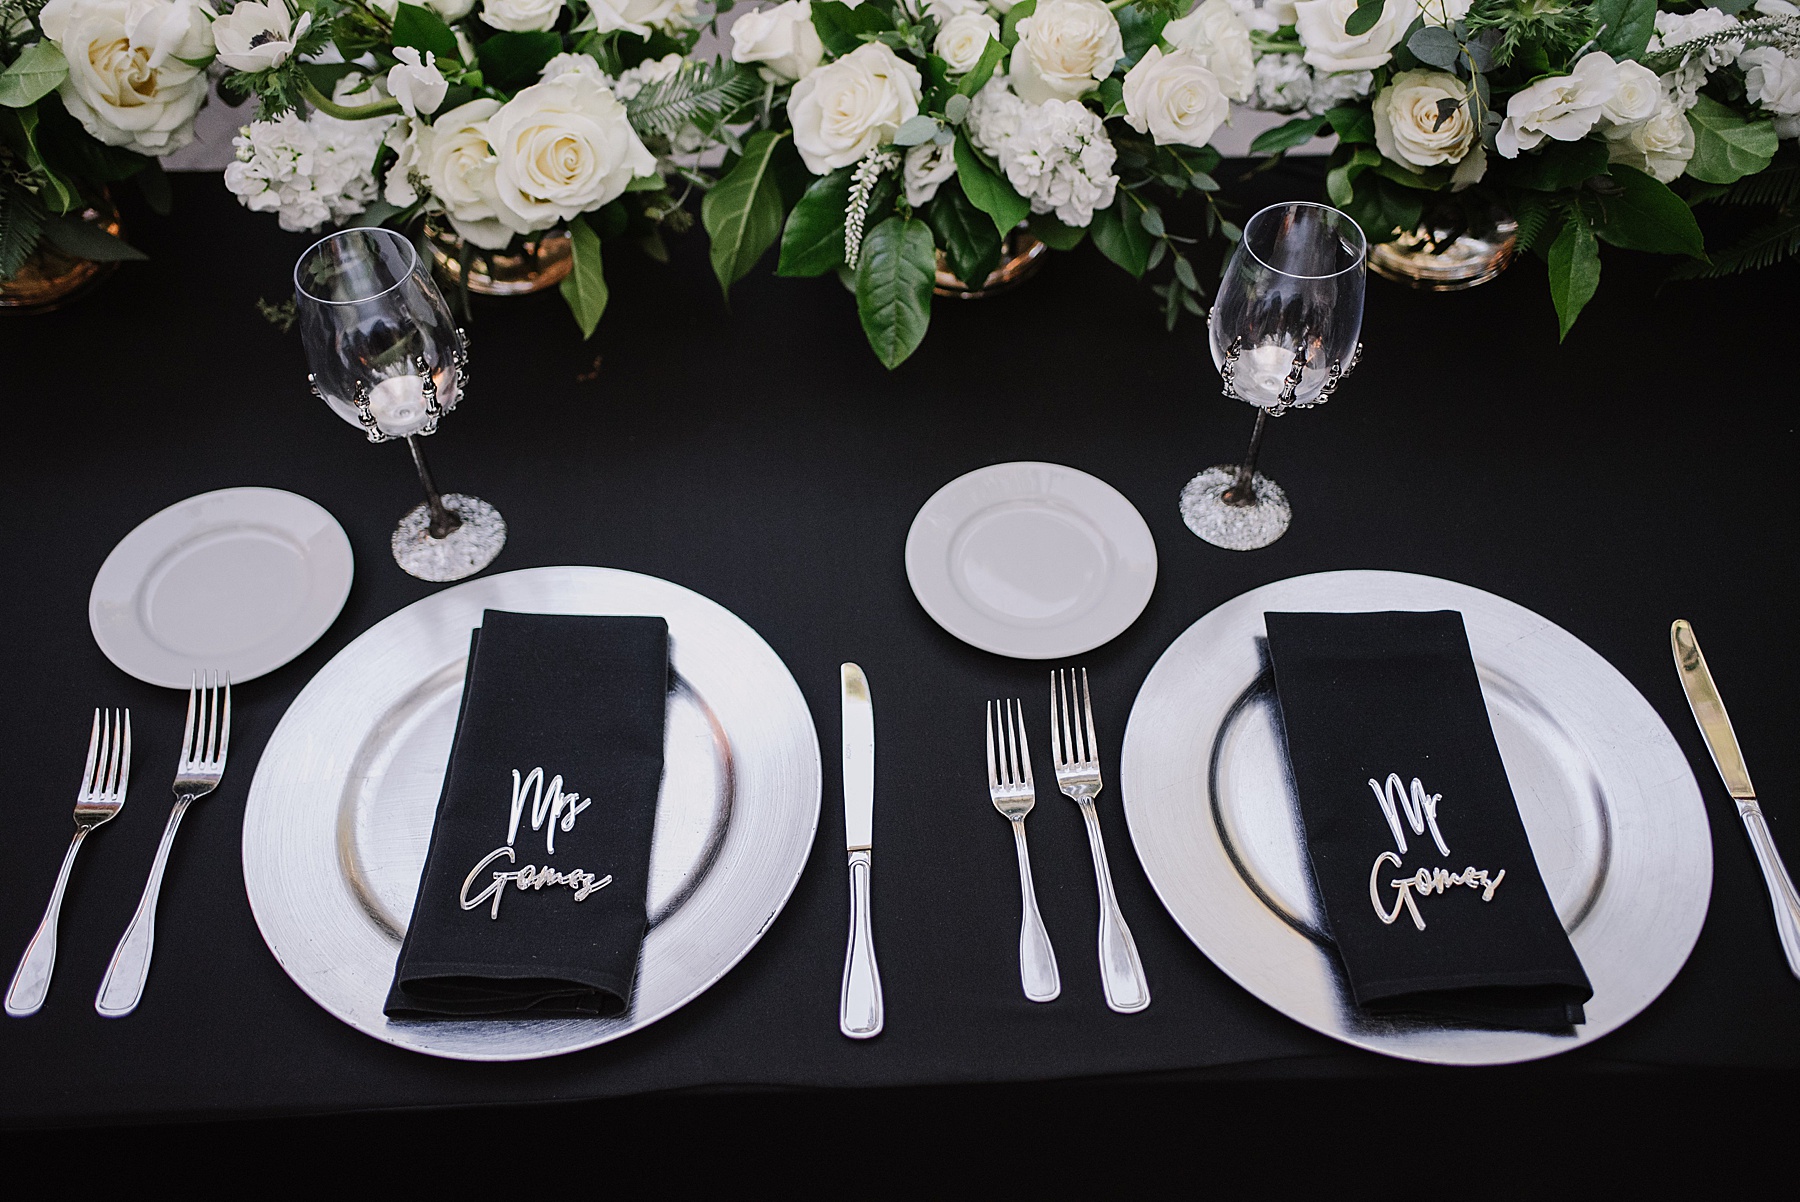 Non-Traditional Dark yet Elegant wedding at Sycamore Mineral Springs